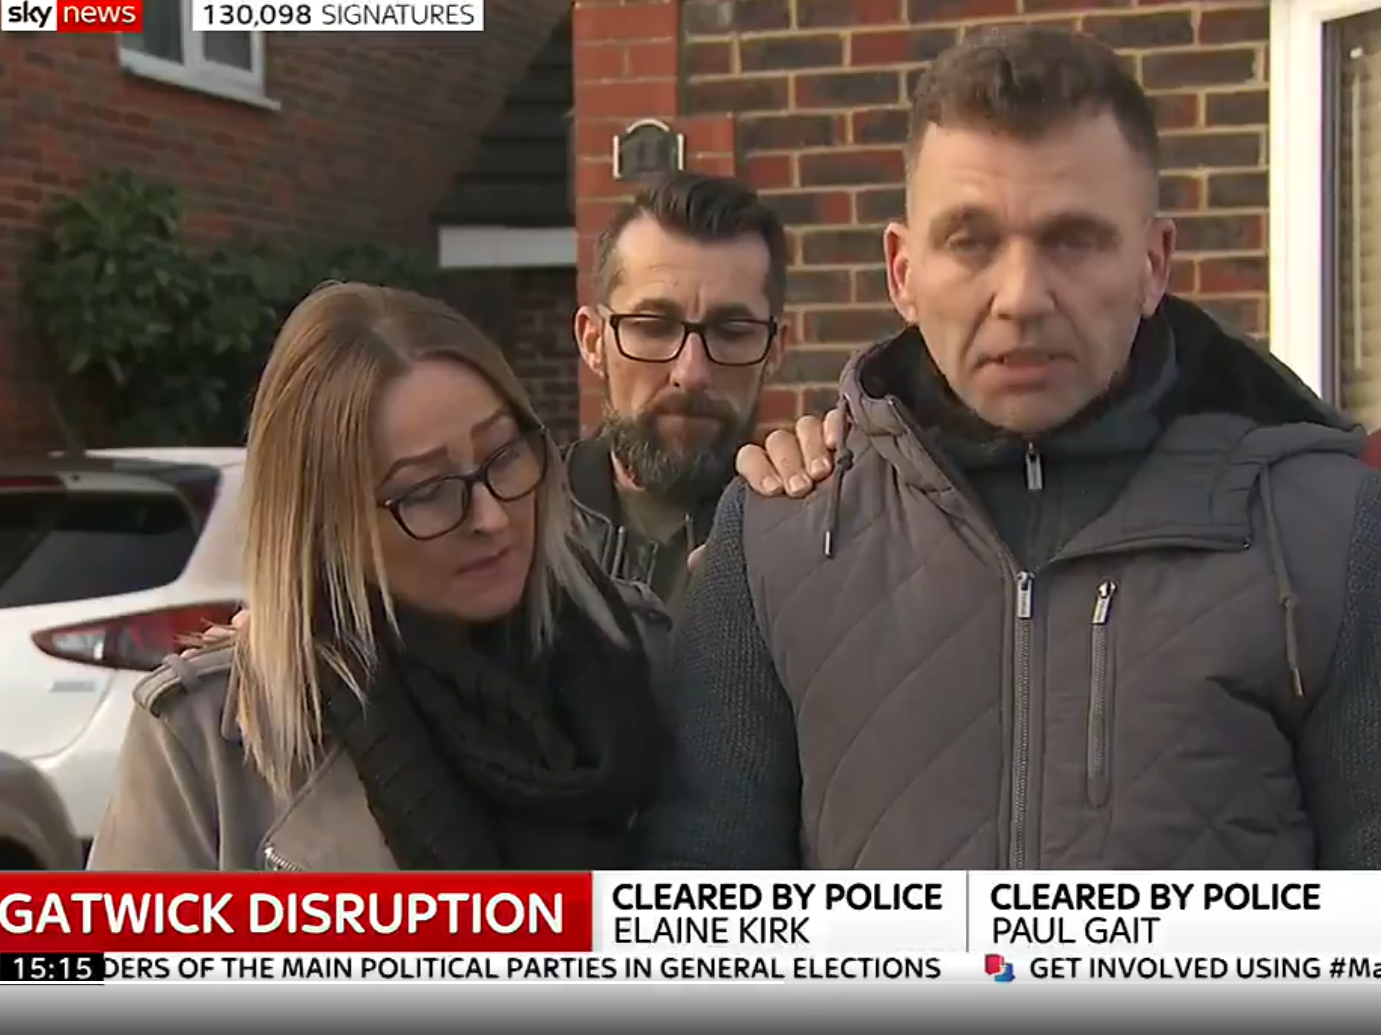 Couple released without charge over Gatwick drone incident hit out at media coverage of arrest but press point to police ‘farce’